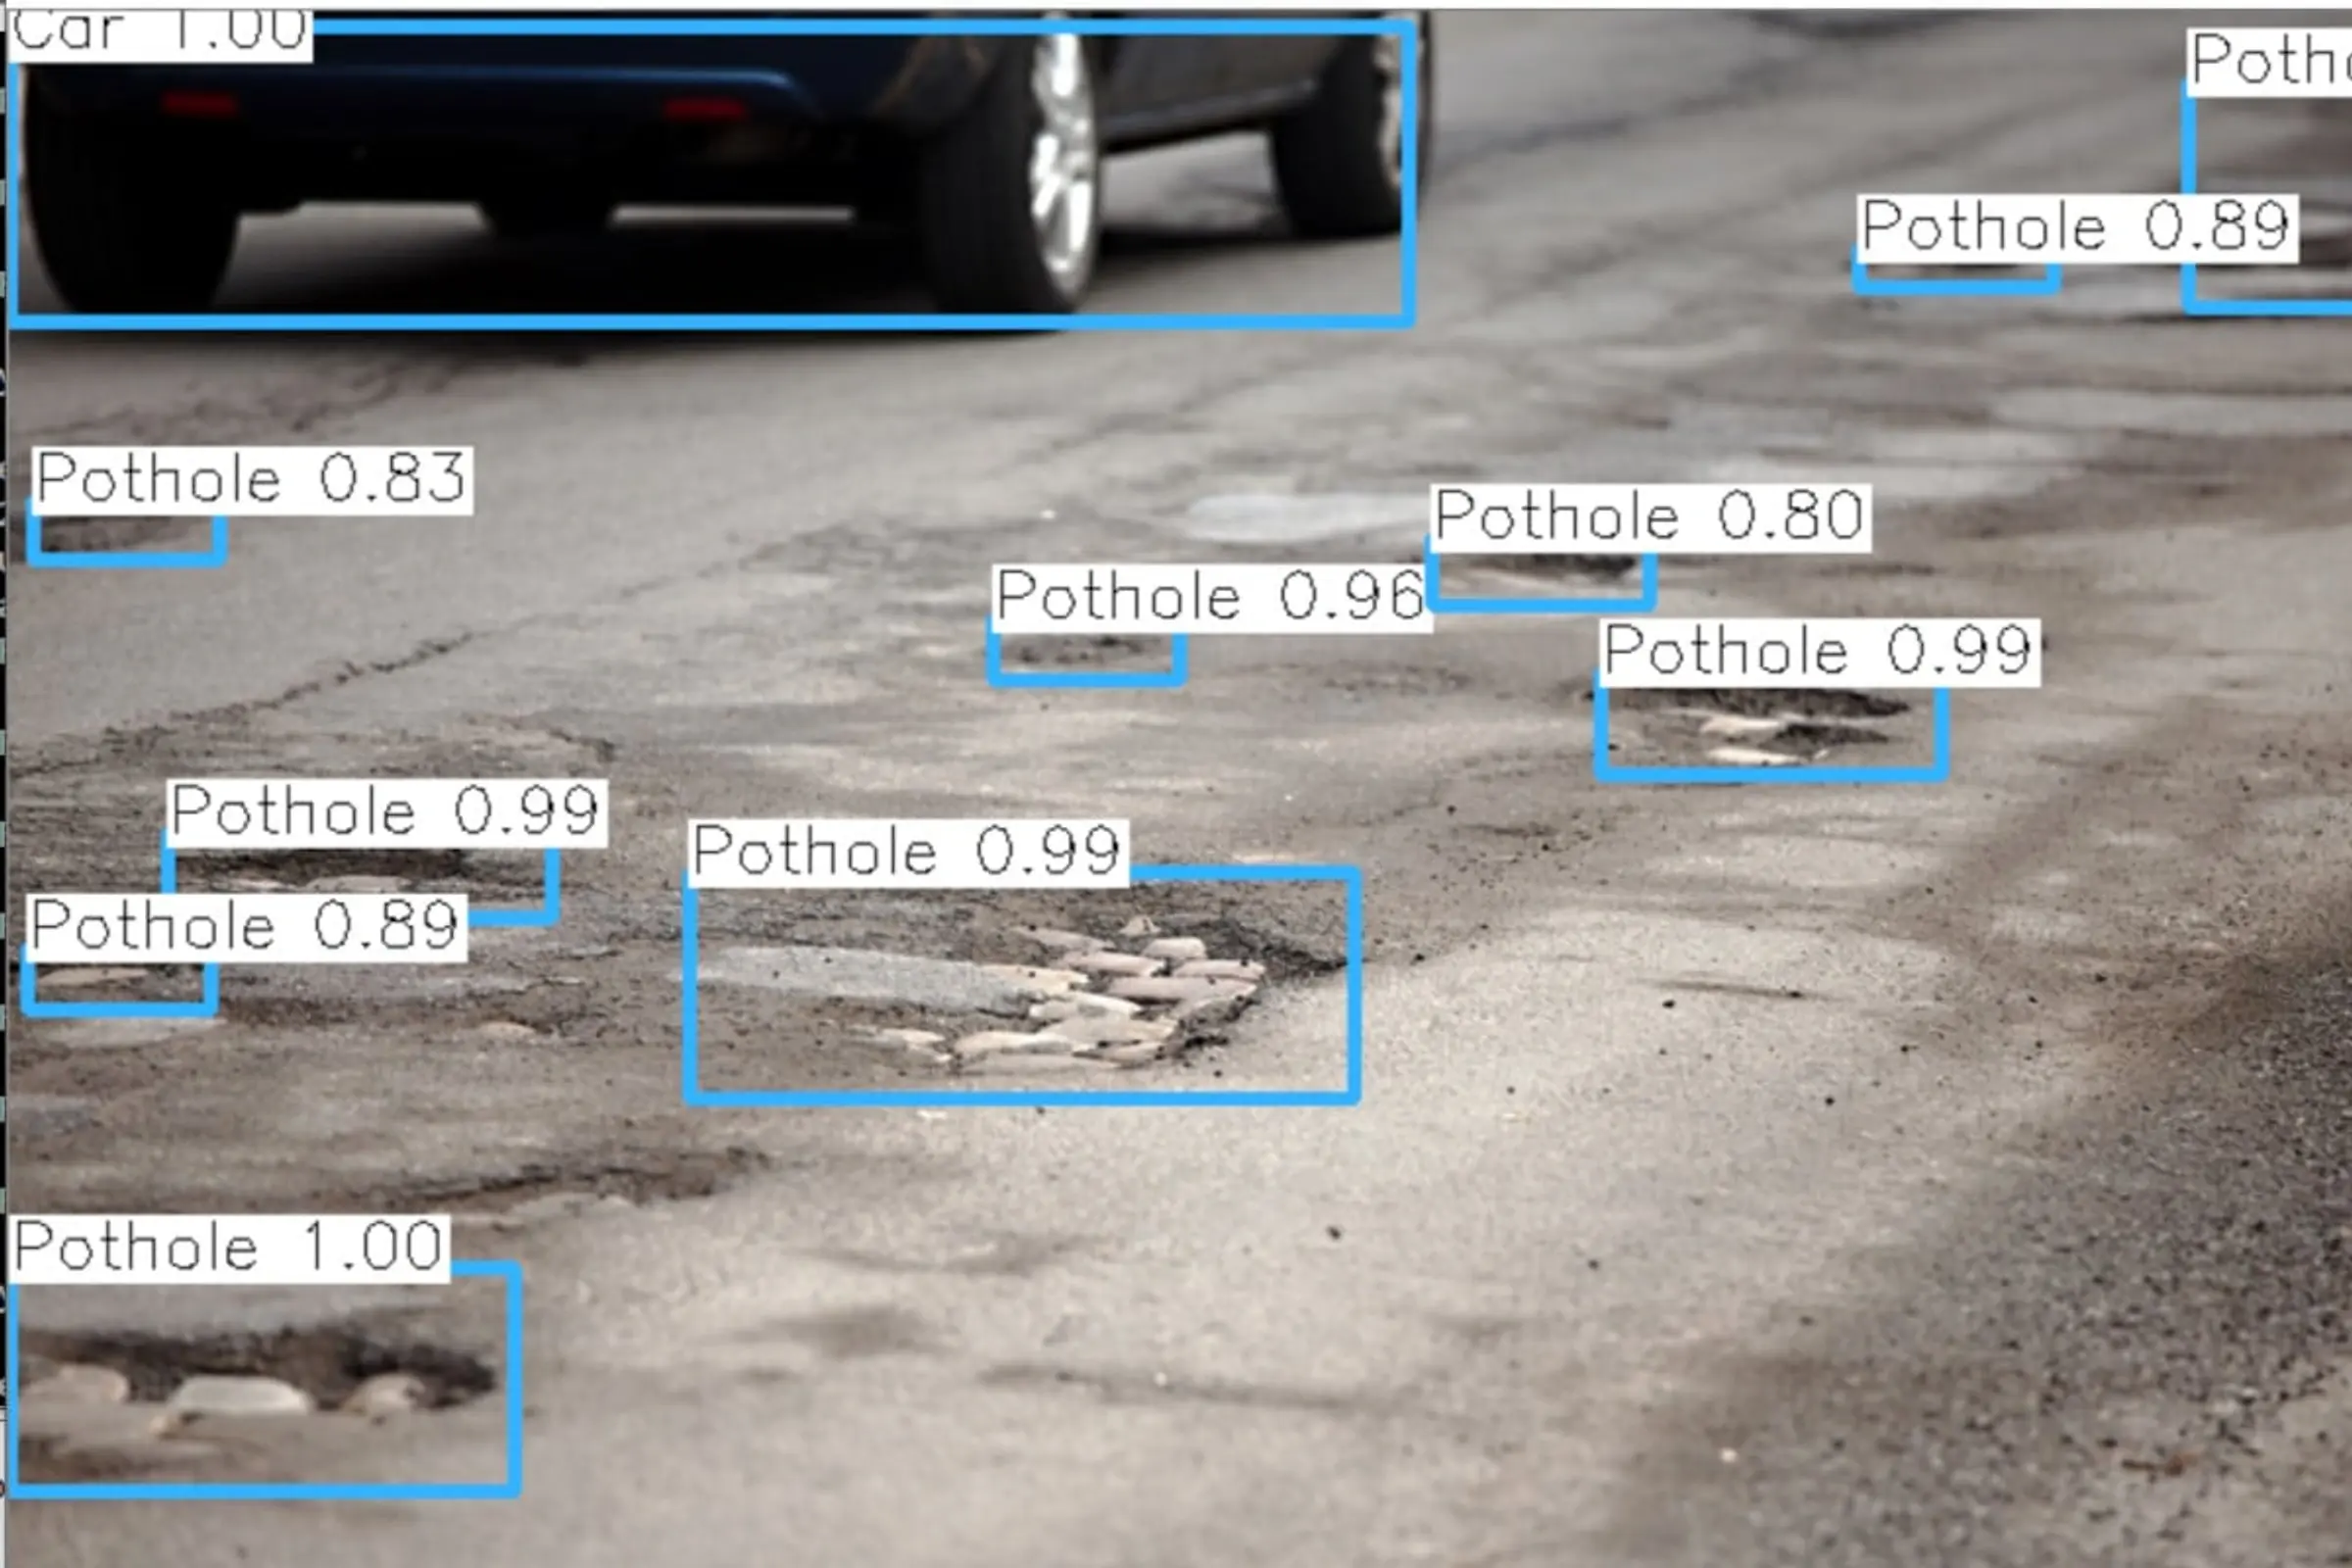 Real-time pothole detection with probability scores.